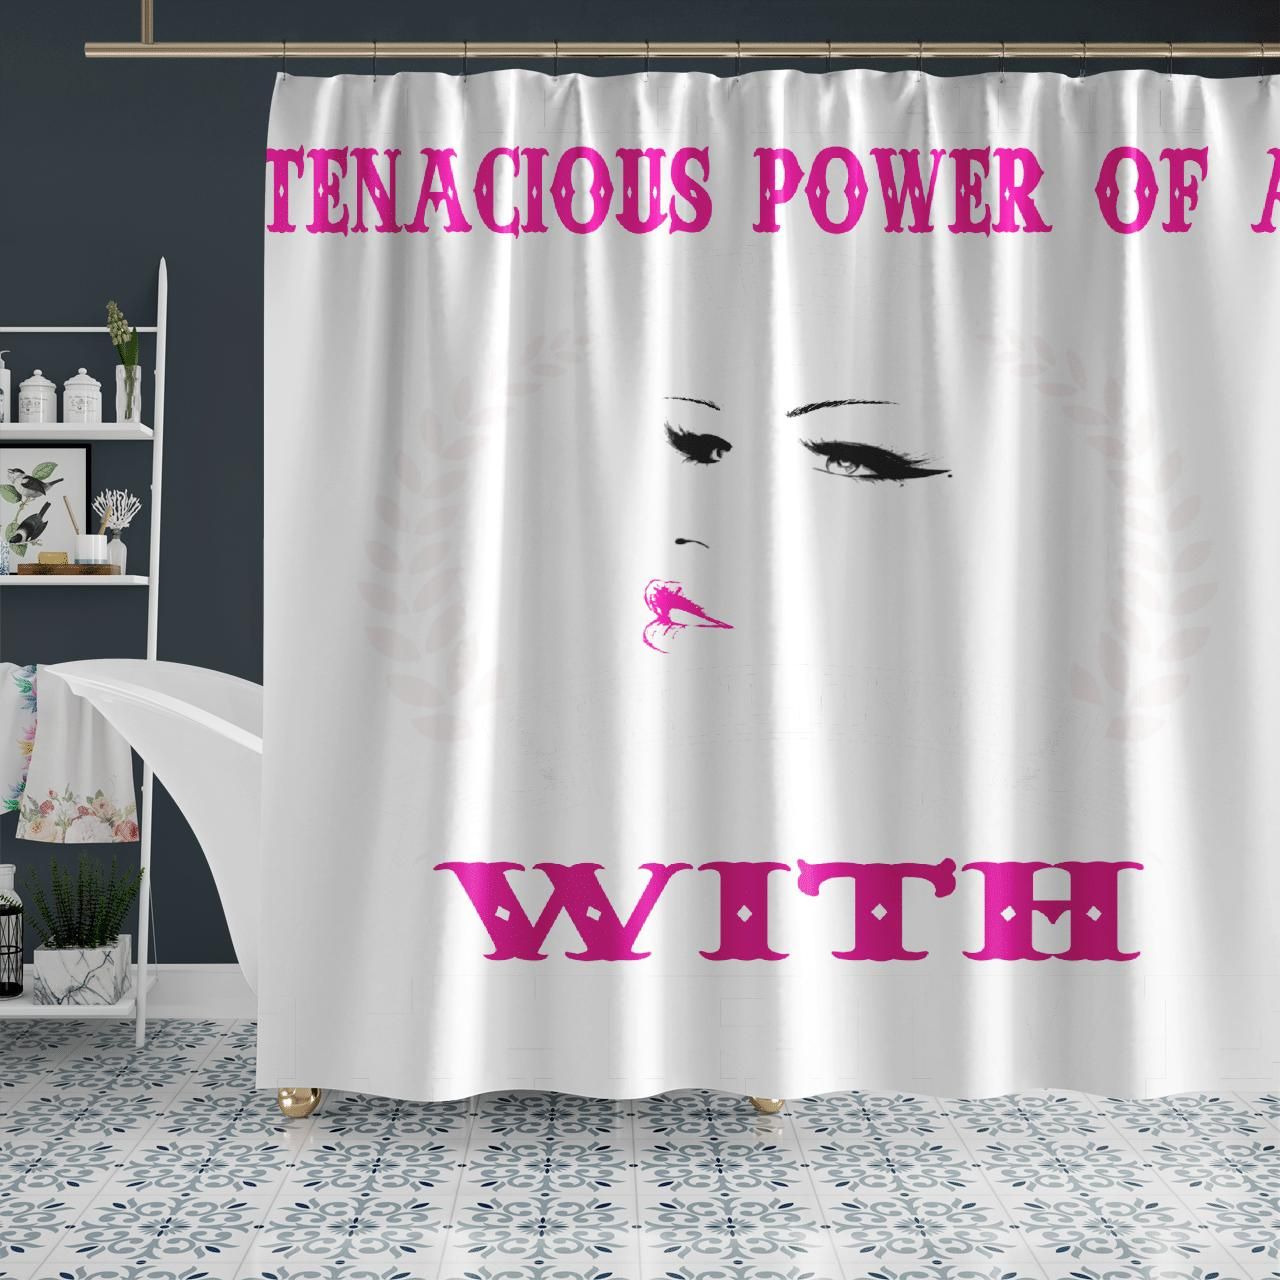 Never Underestimate The Tenacious Power Of A Girl In Love With Thrive Shower Curtain